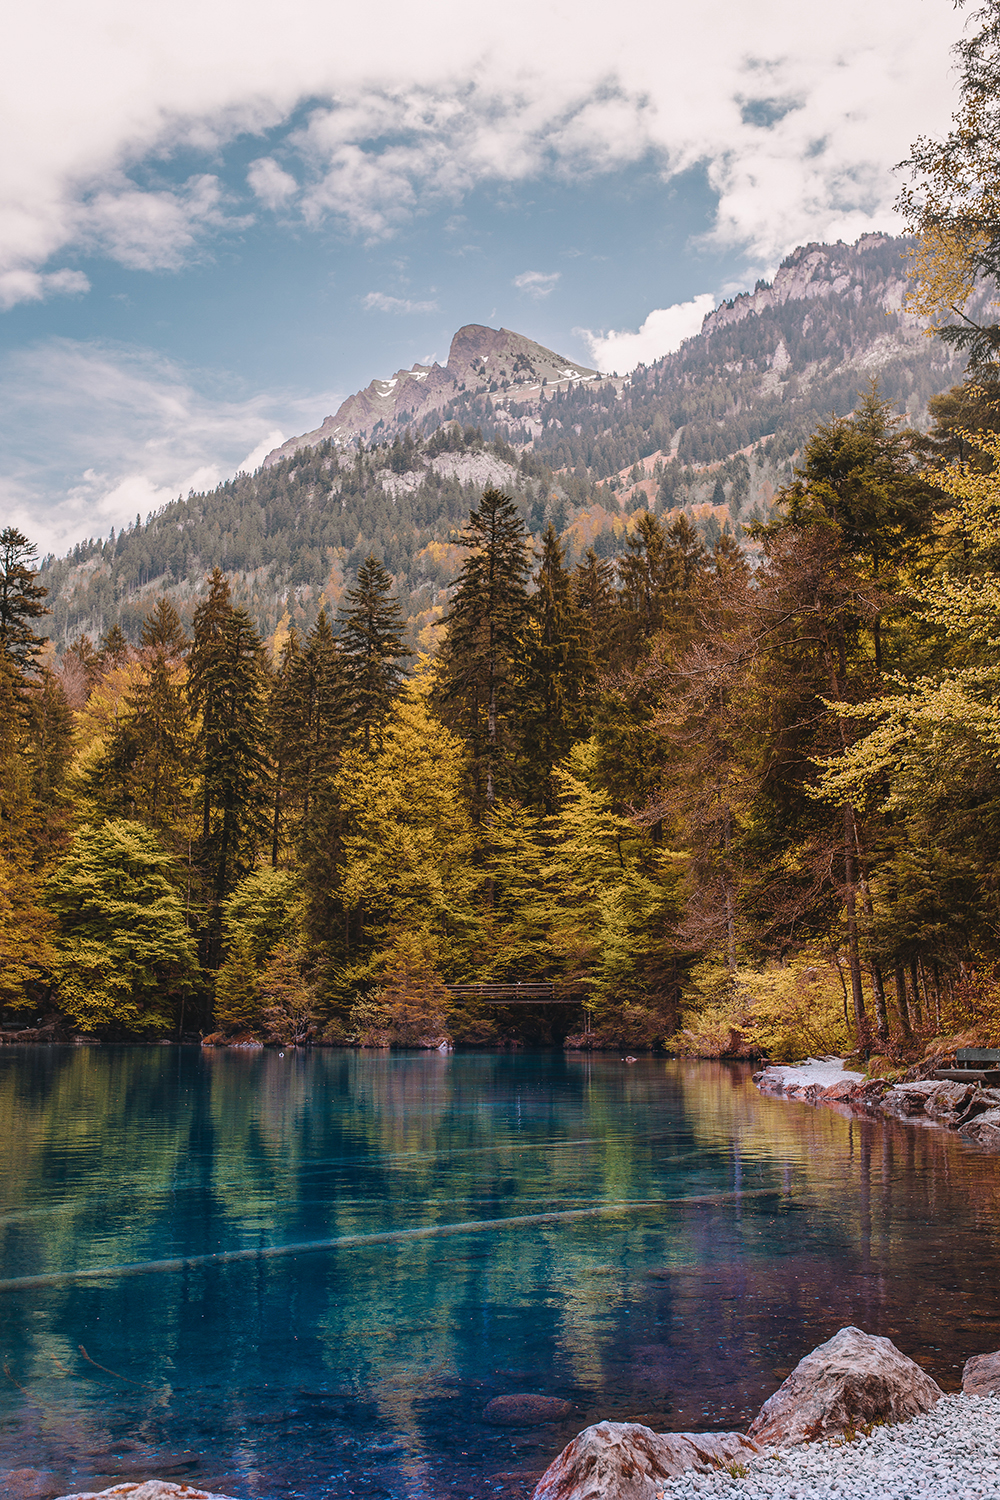 The stunning blue waters of Lake Blausee, Switzerland with the Swiss Alps in the background.